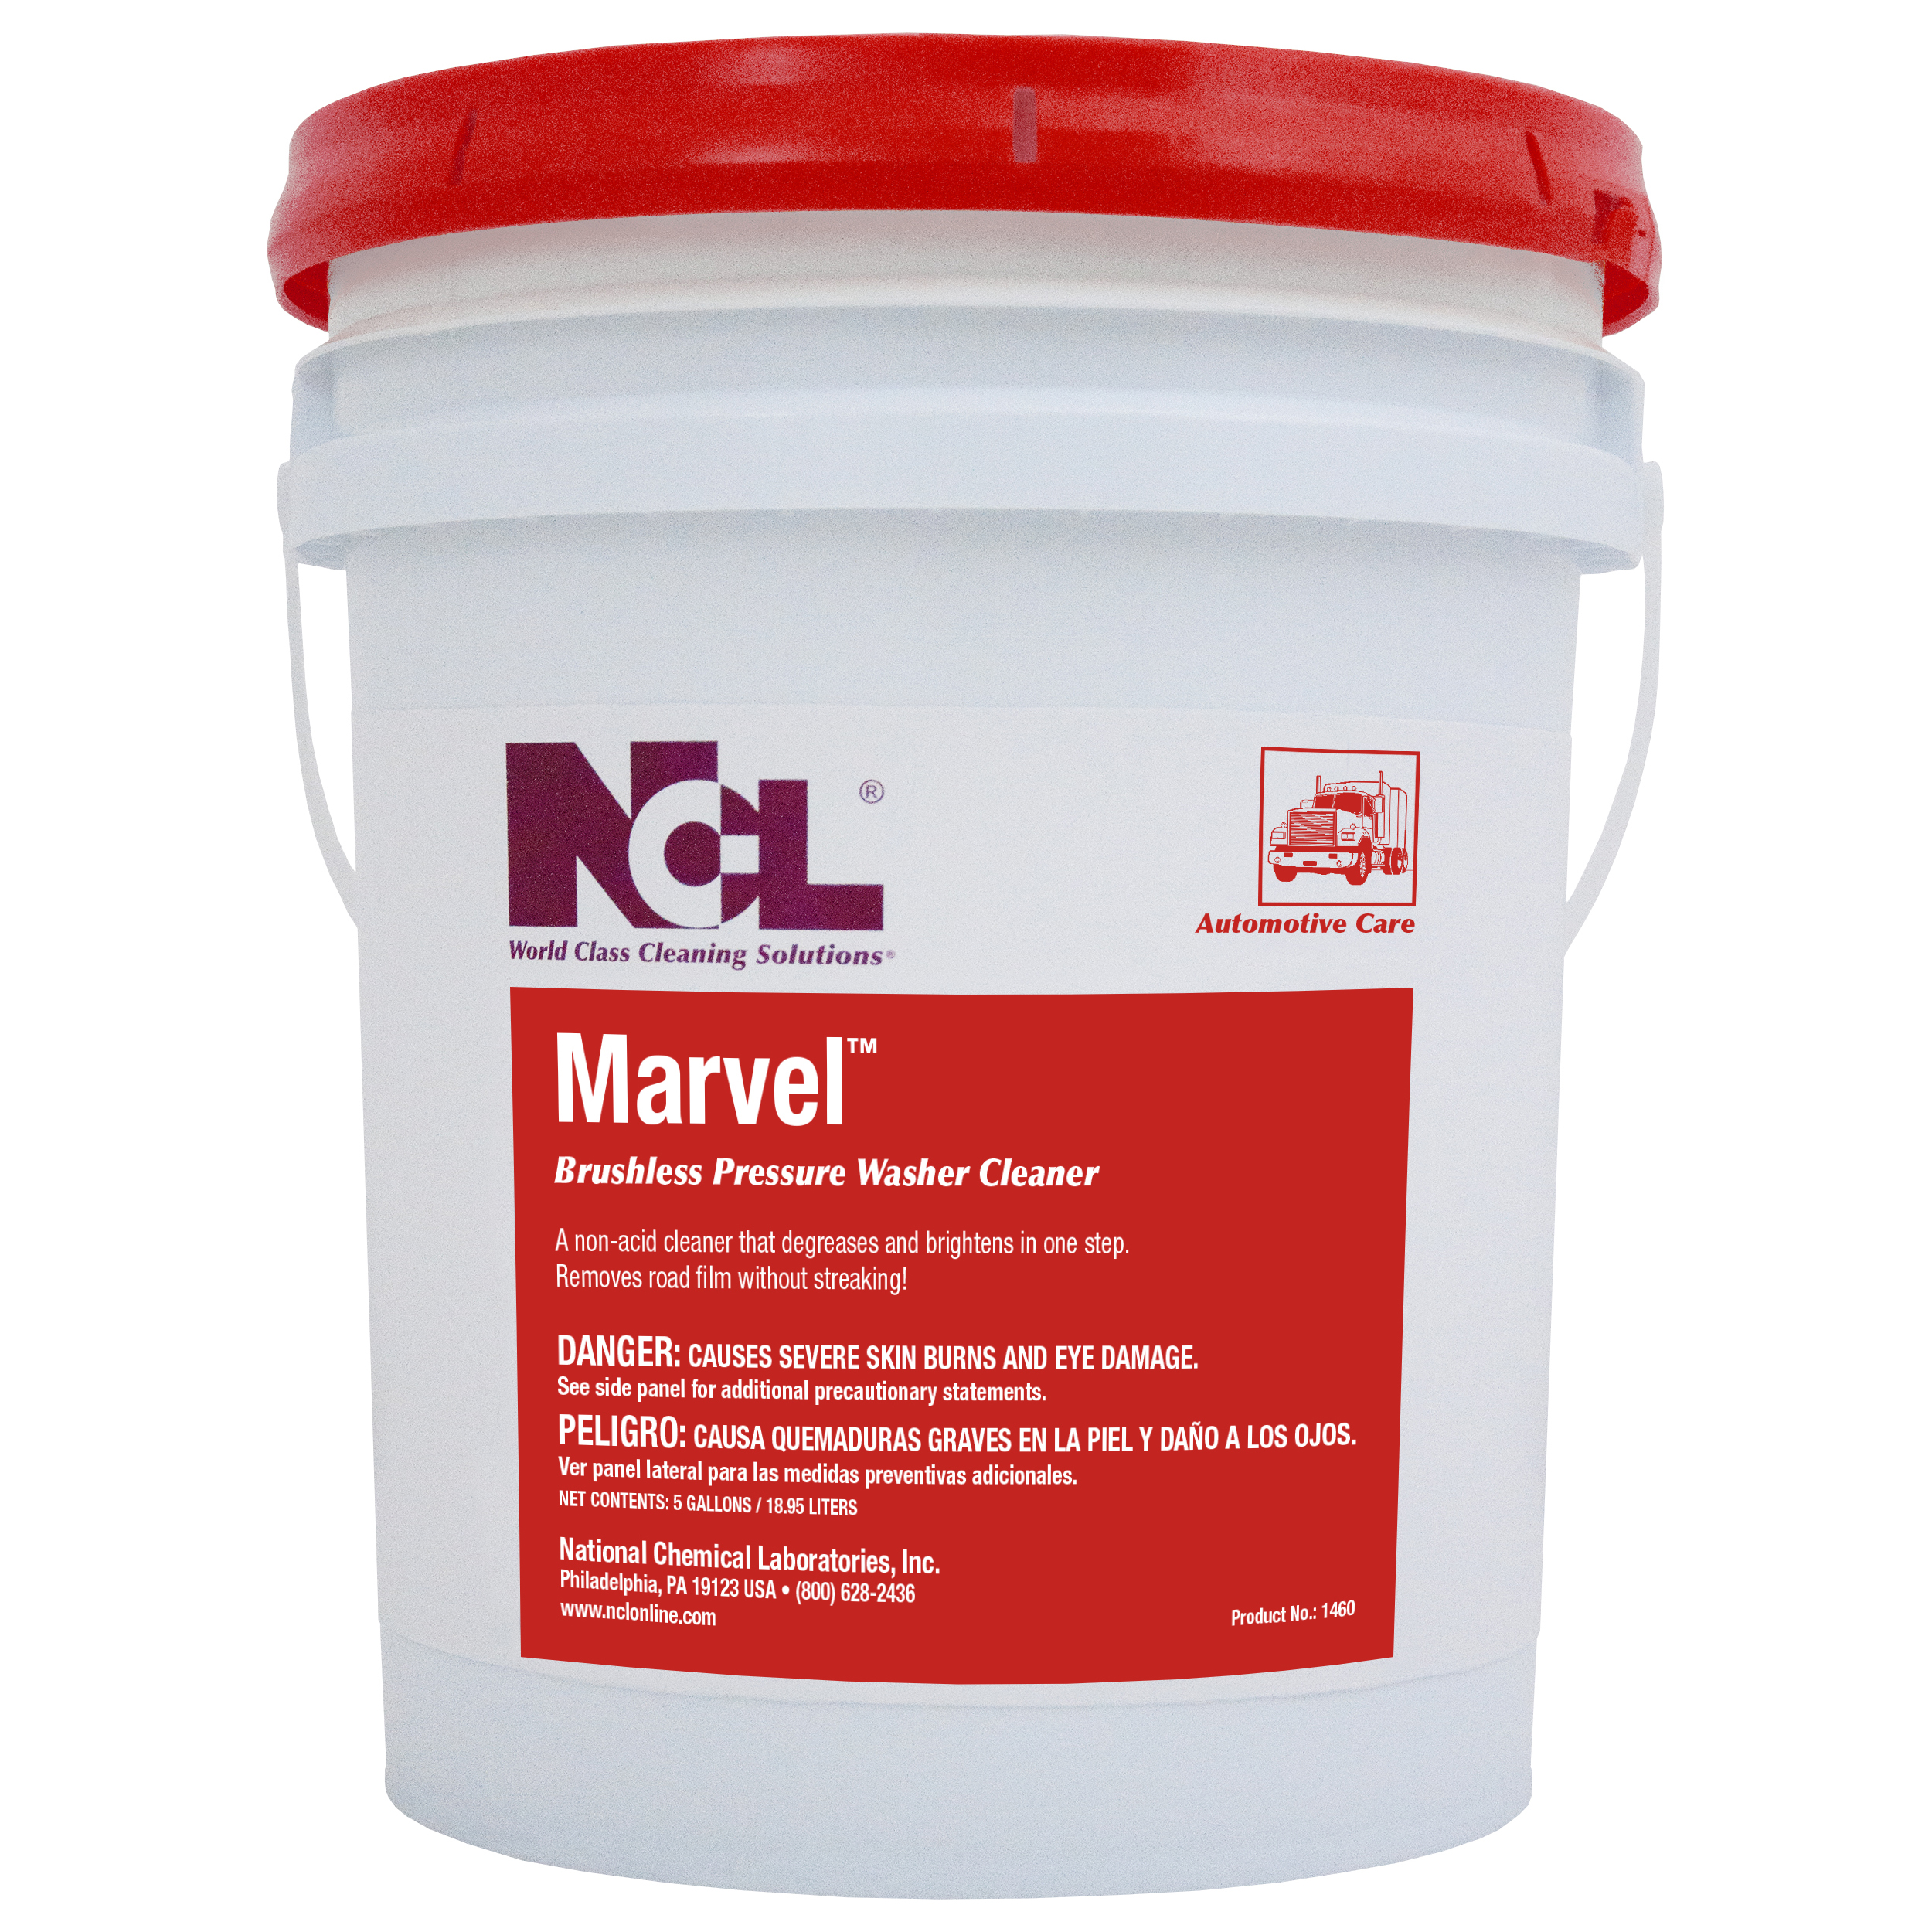  MARVEL Brushless Pressure Washer Cleaner 5 Gal. Pail (NCL1460-21) 